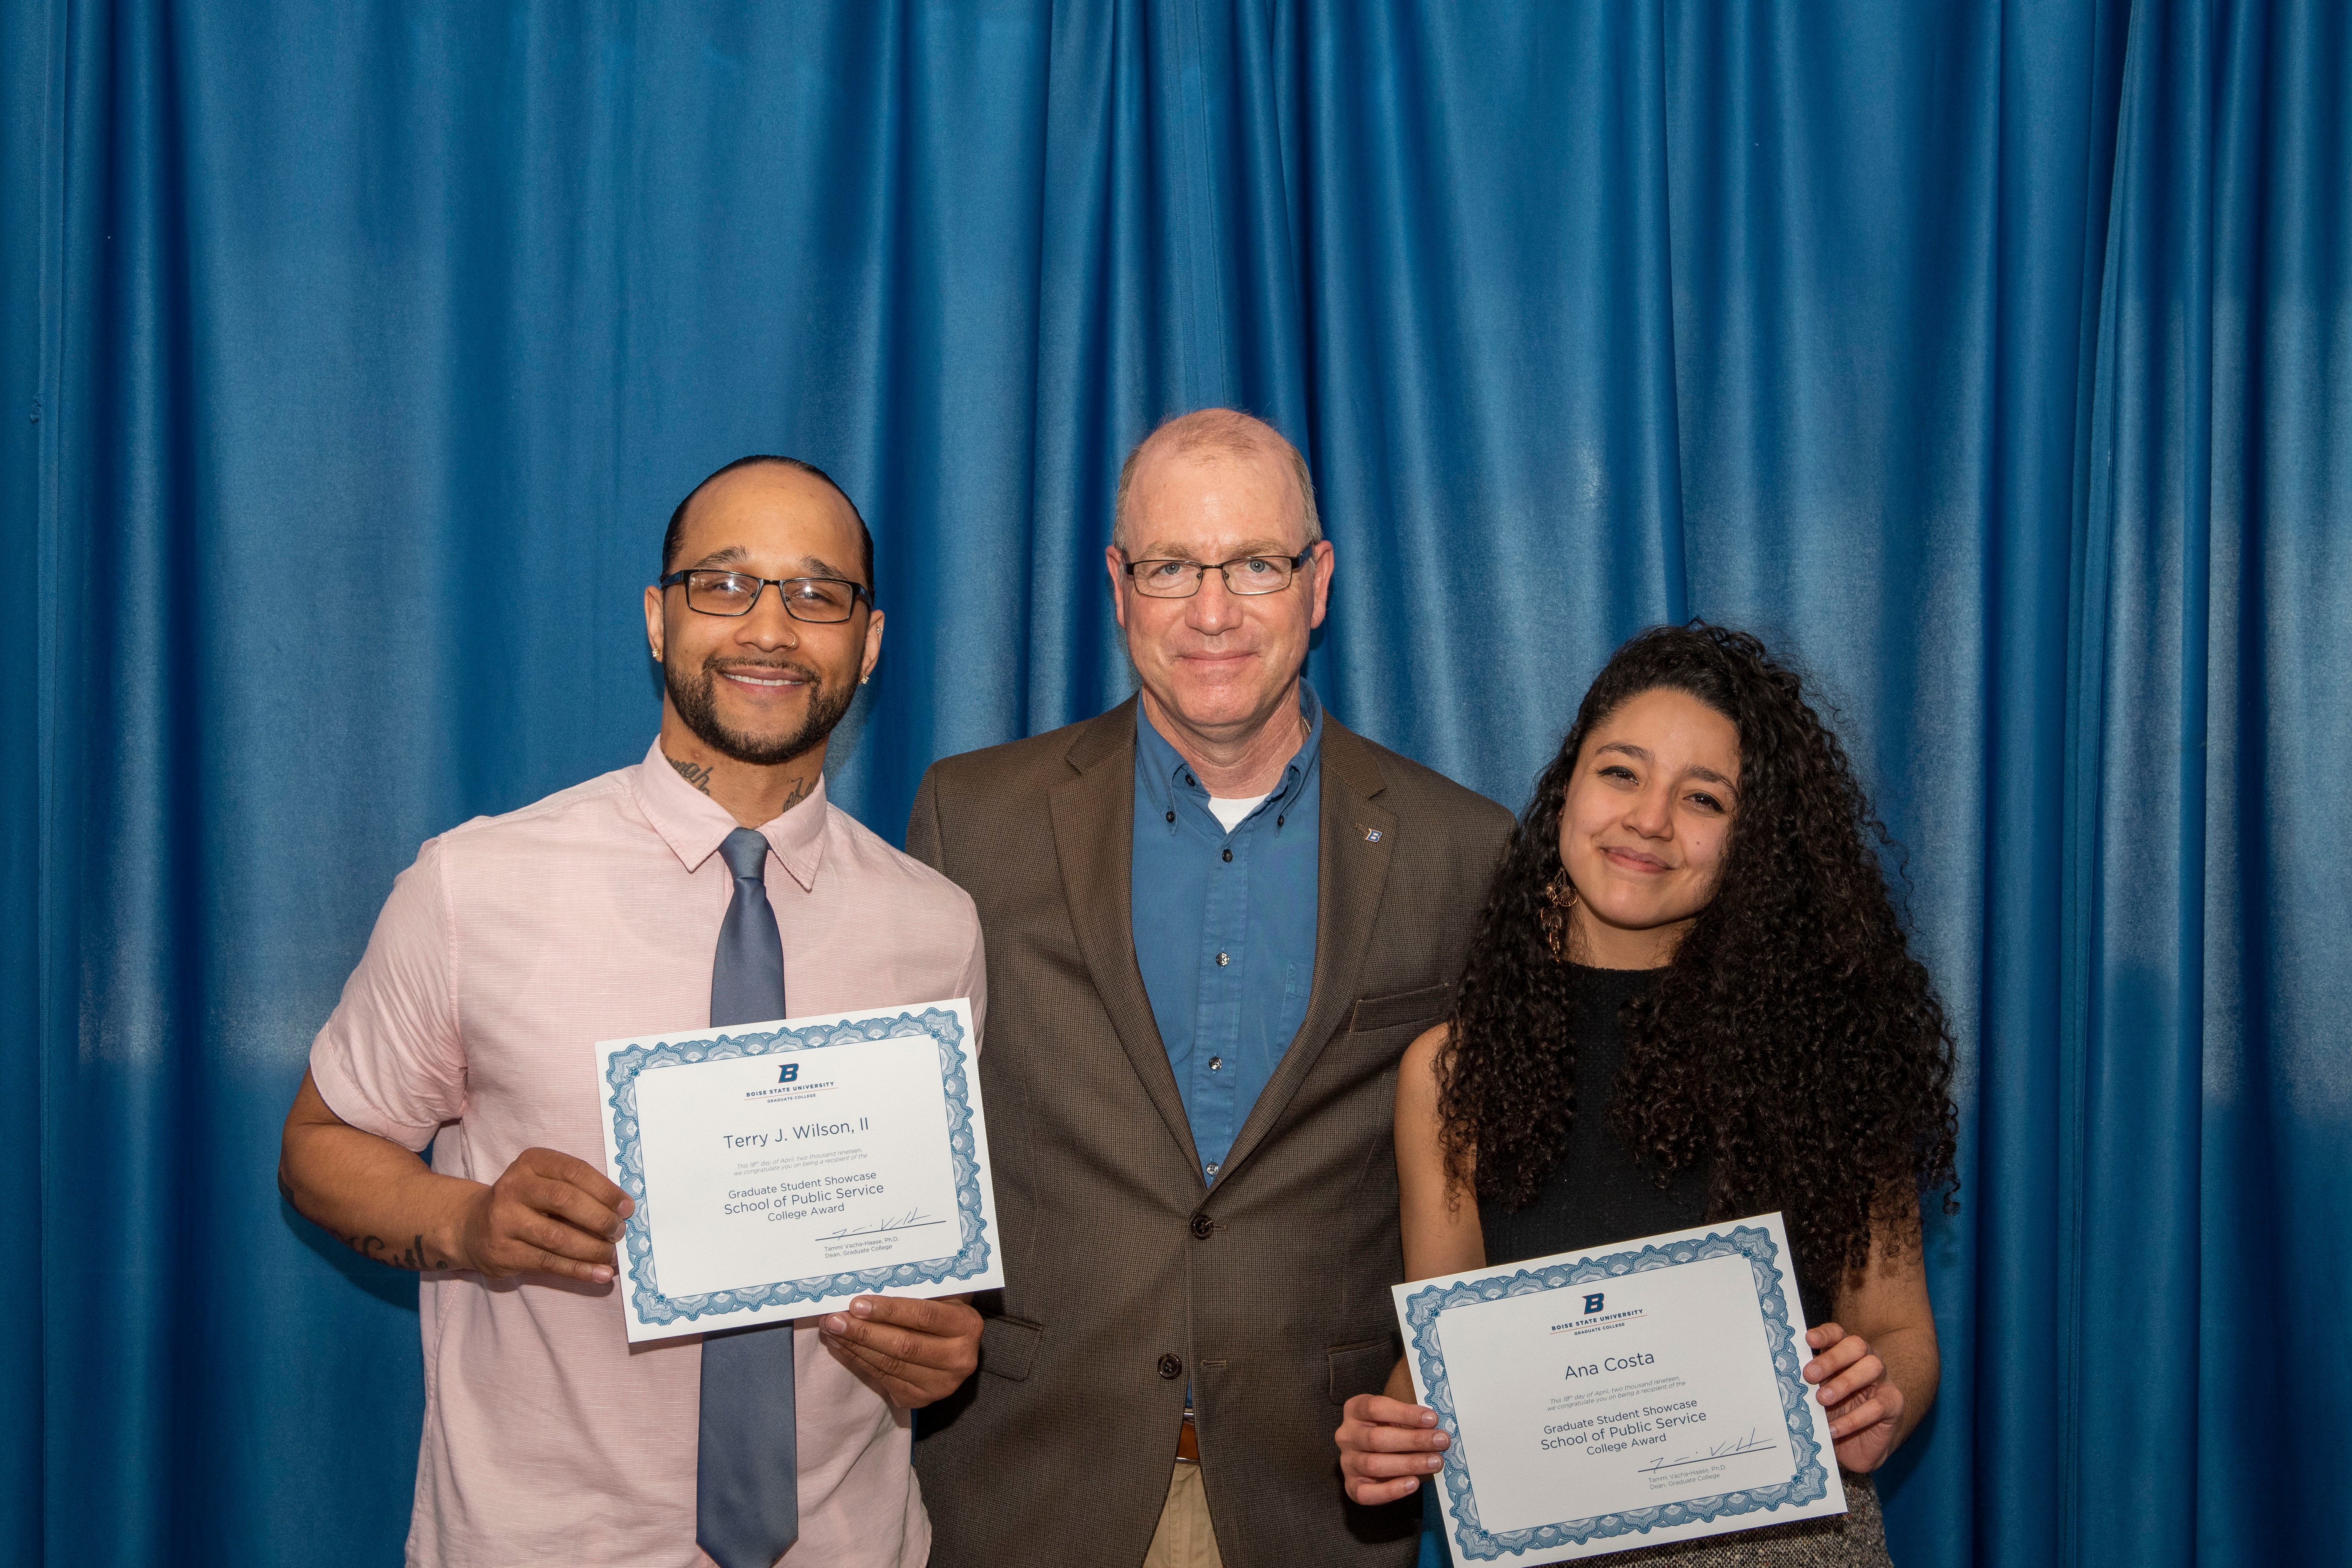 Graduate College Awards winners Terry Wilson and Ana Costa pictured with Dr. Andrew Giacomazzi